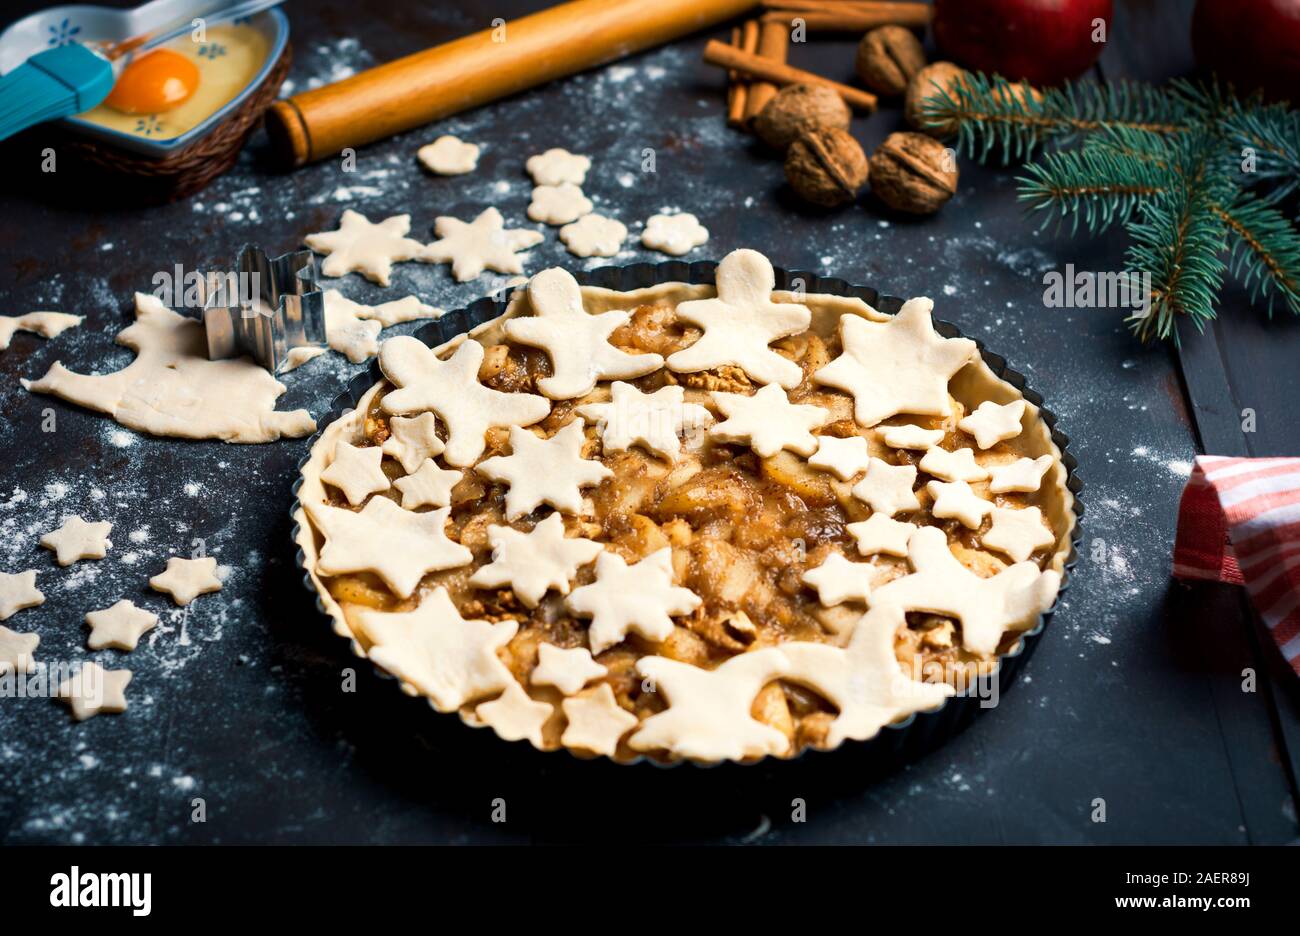 Festive decorated Apple pie in making on a festive decorated table Stock Photo